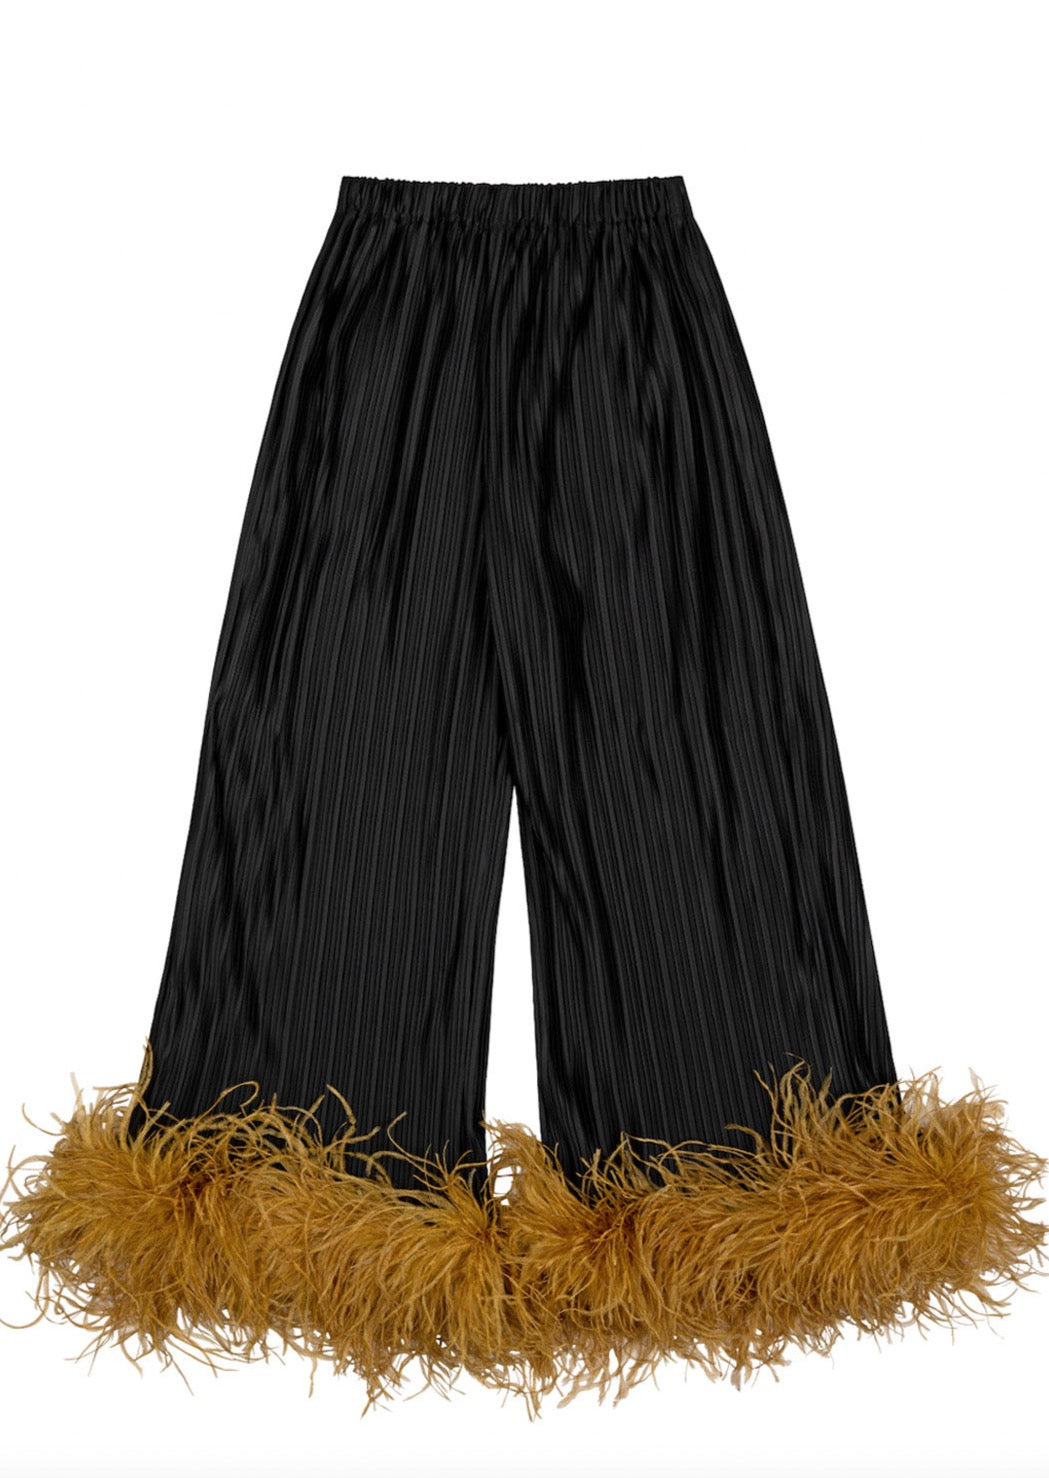 The perfect partner to your late night disco, these swingy pleated high waist trousers are finished in a sweep of ginger-hued feathers.